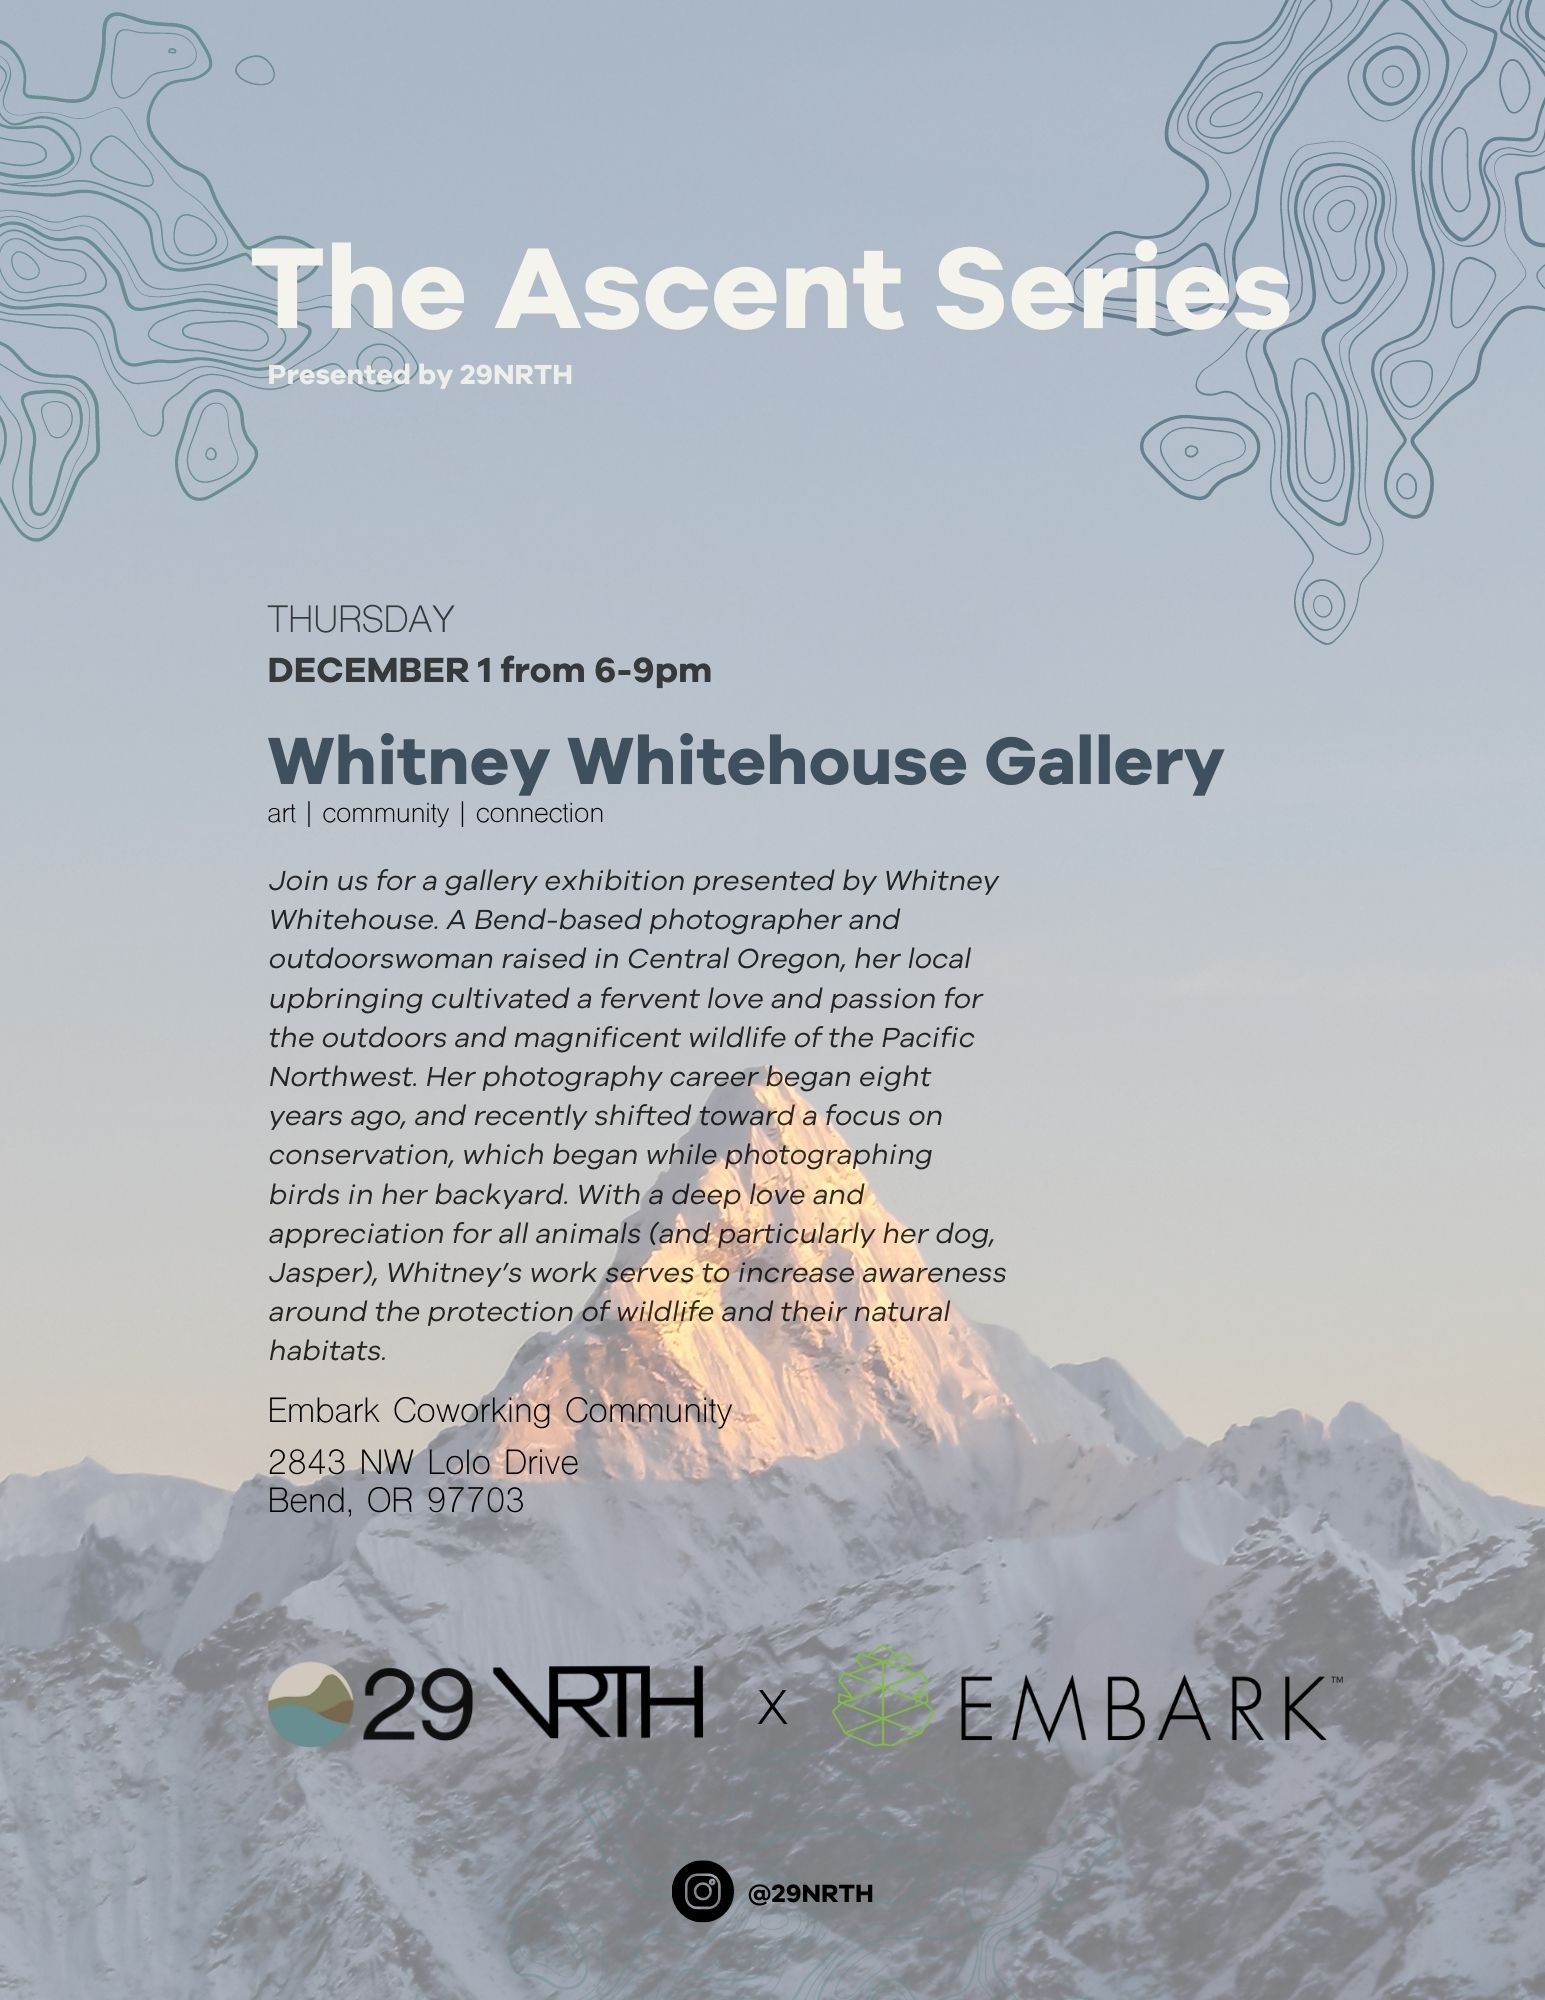 The Ascent Series @ Embark – Whitney Whitehouse Gallery